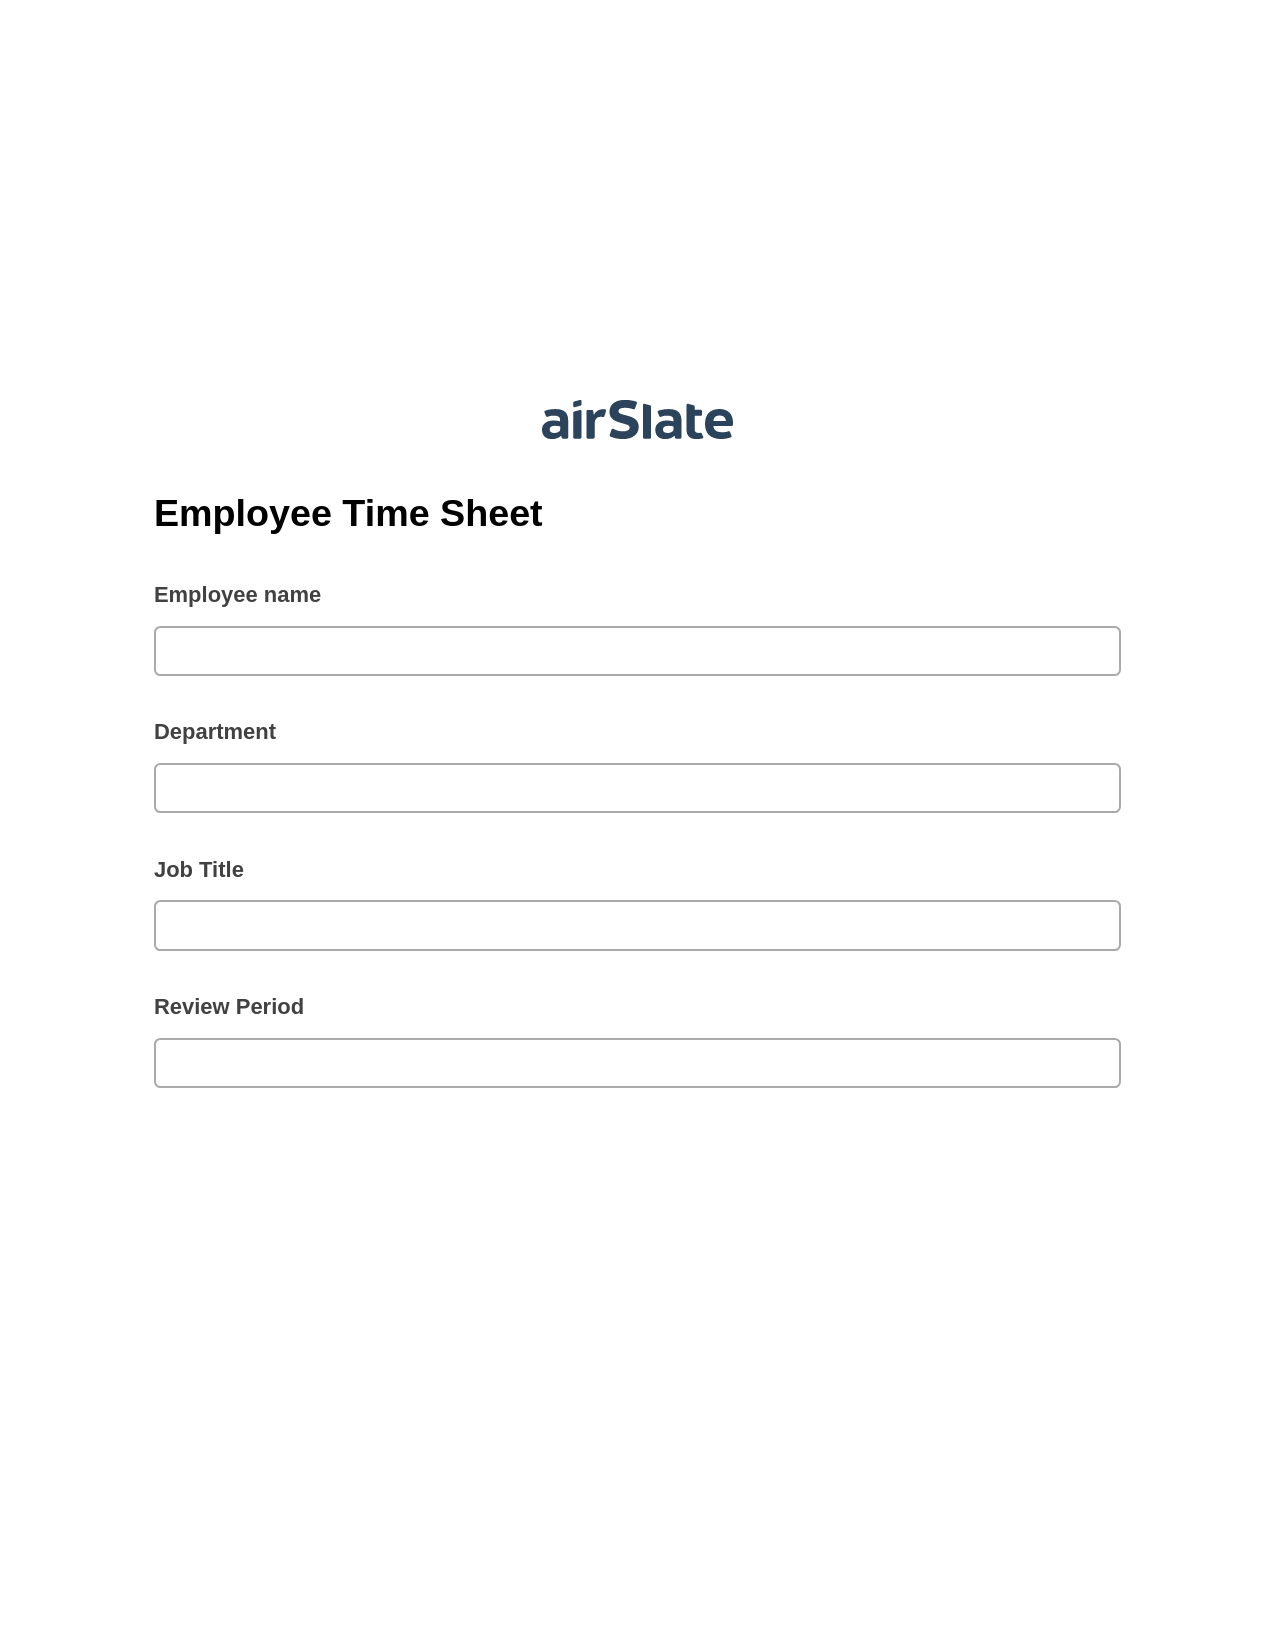 Multirole Employee Time Sheet Pre-fill from Google Sheets Bot, Update Audit Trail Bot, Export to Smartsheet